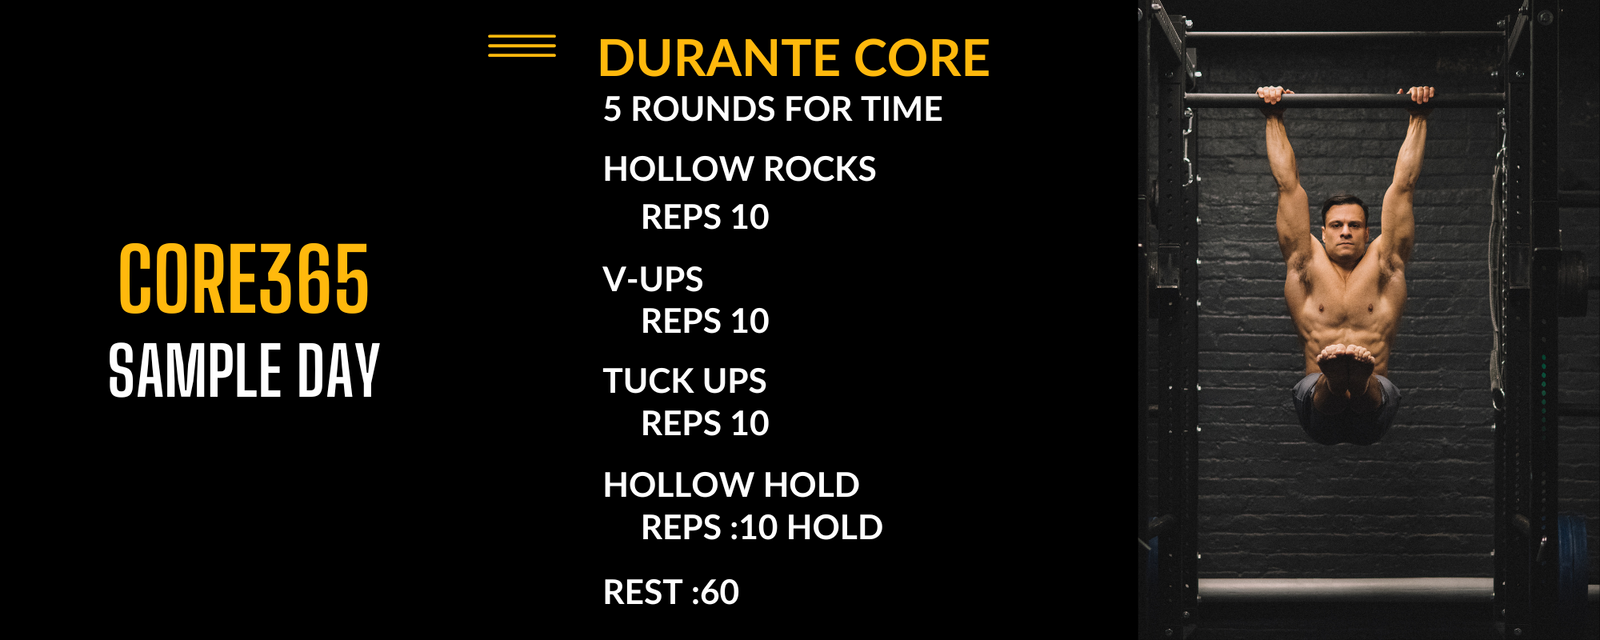 Sample day of programming in the Core365 app in the Power Monkey Training app. The workout is durante core and includes a photo of david durante in a hanging L Sit. 